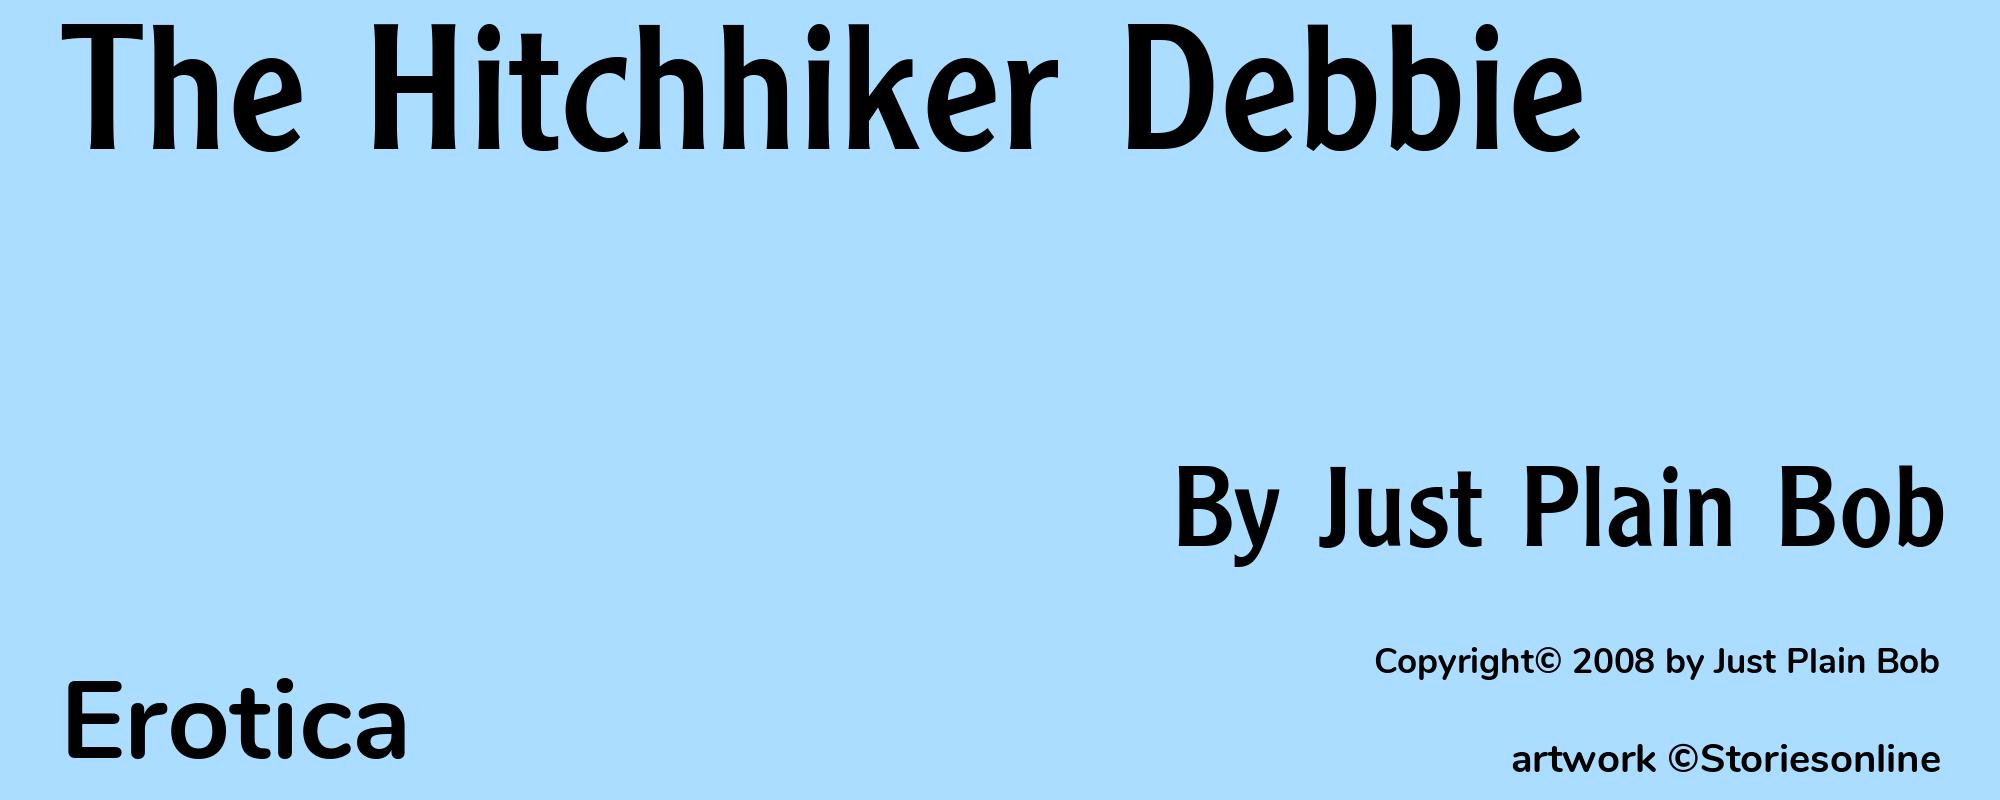 The Hitchhiker Debbie - Cover